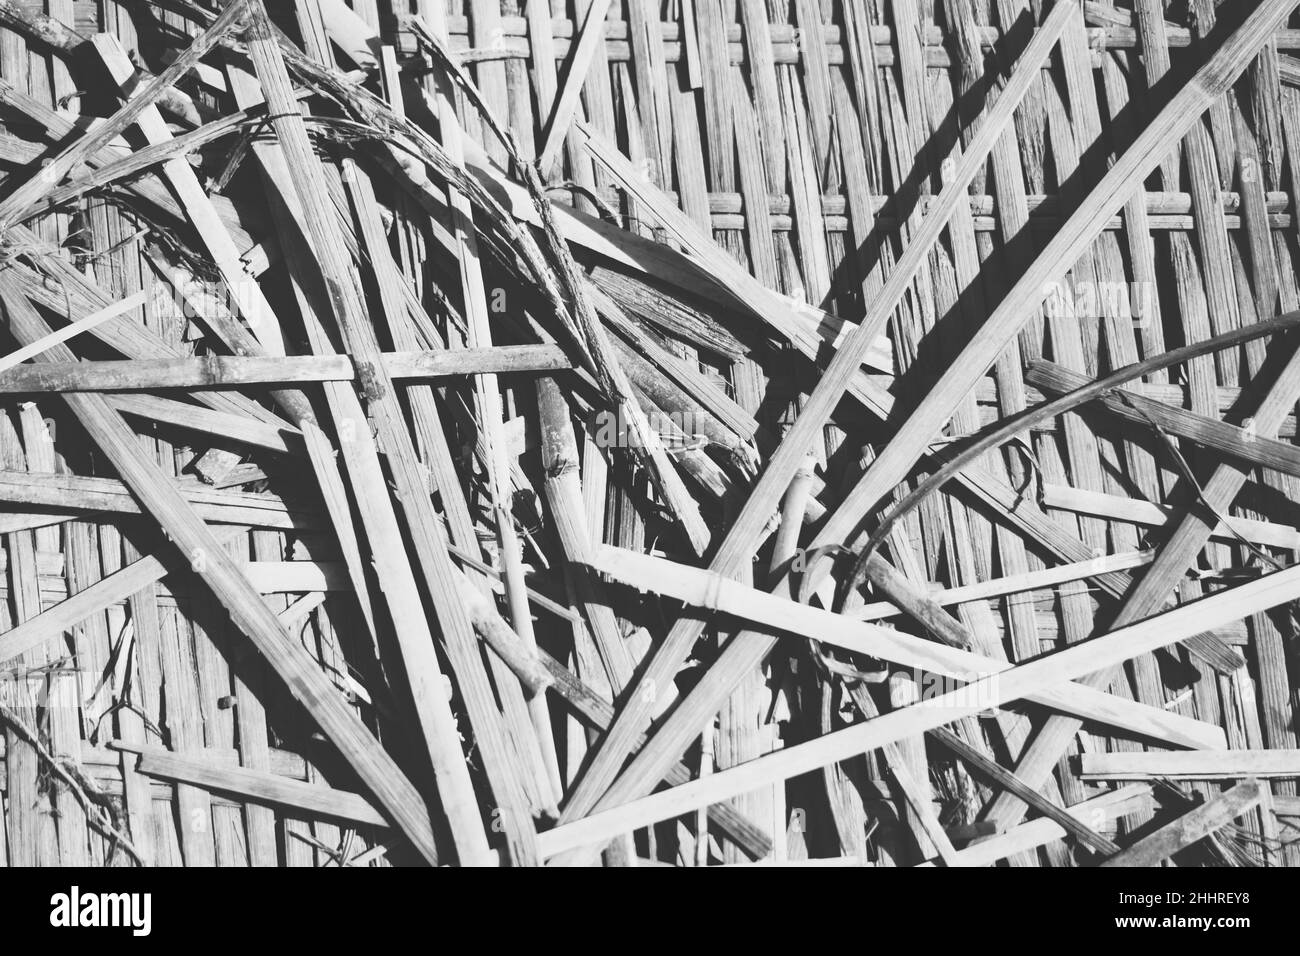 Real nature abstract background. Bamboo straws weaving texture mat, light gray black white colour vintage effect. Calm warm simple life style mood Stock Photo